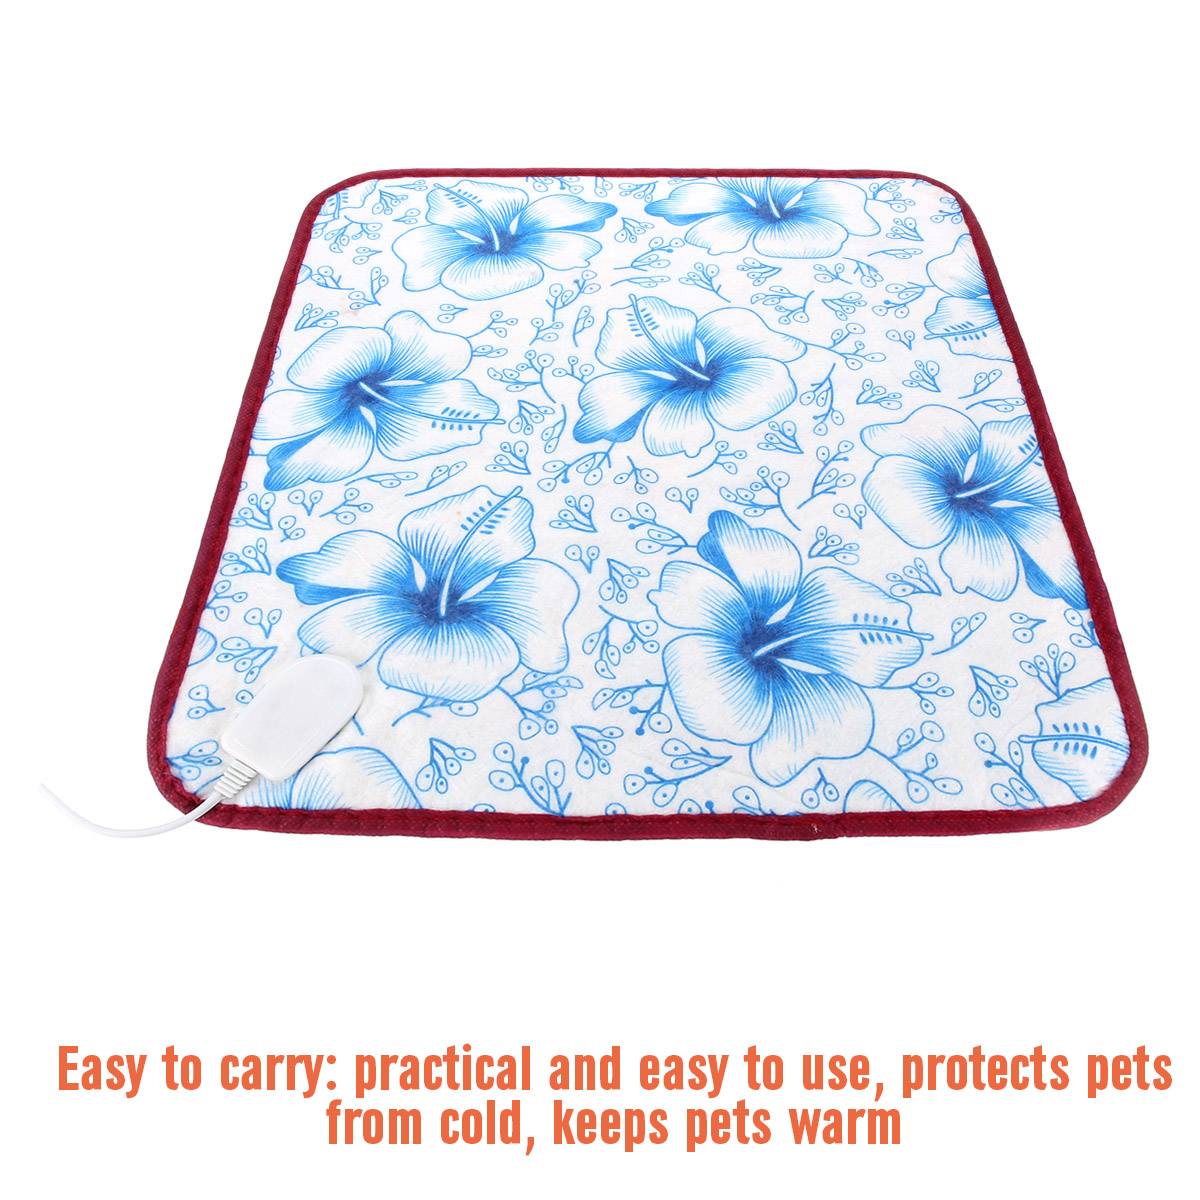 Pet cat and dog electric blanket